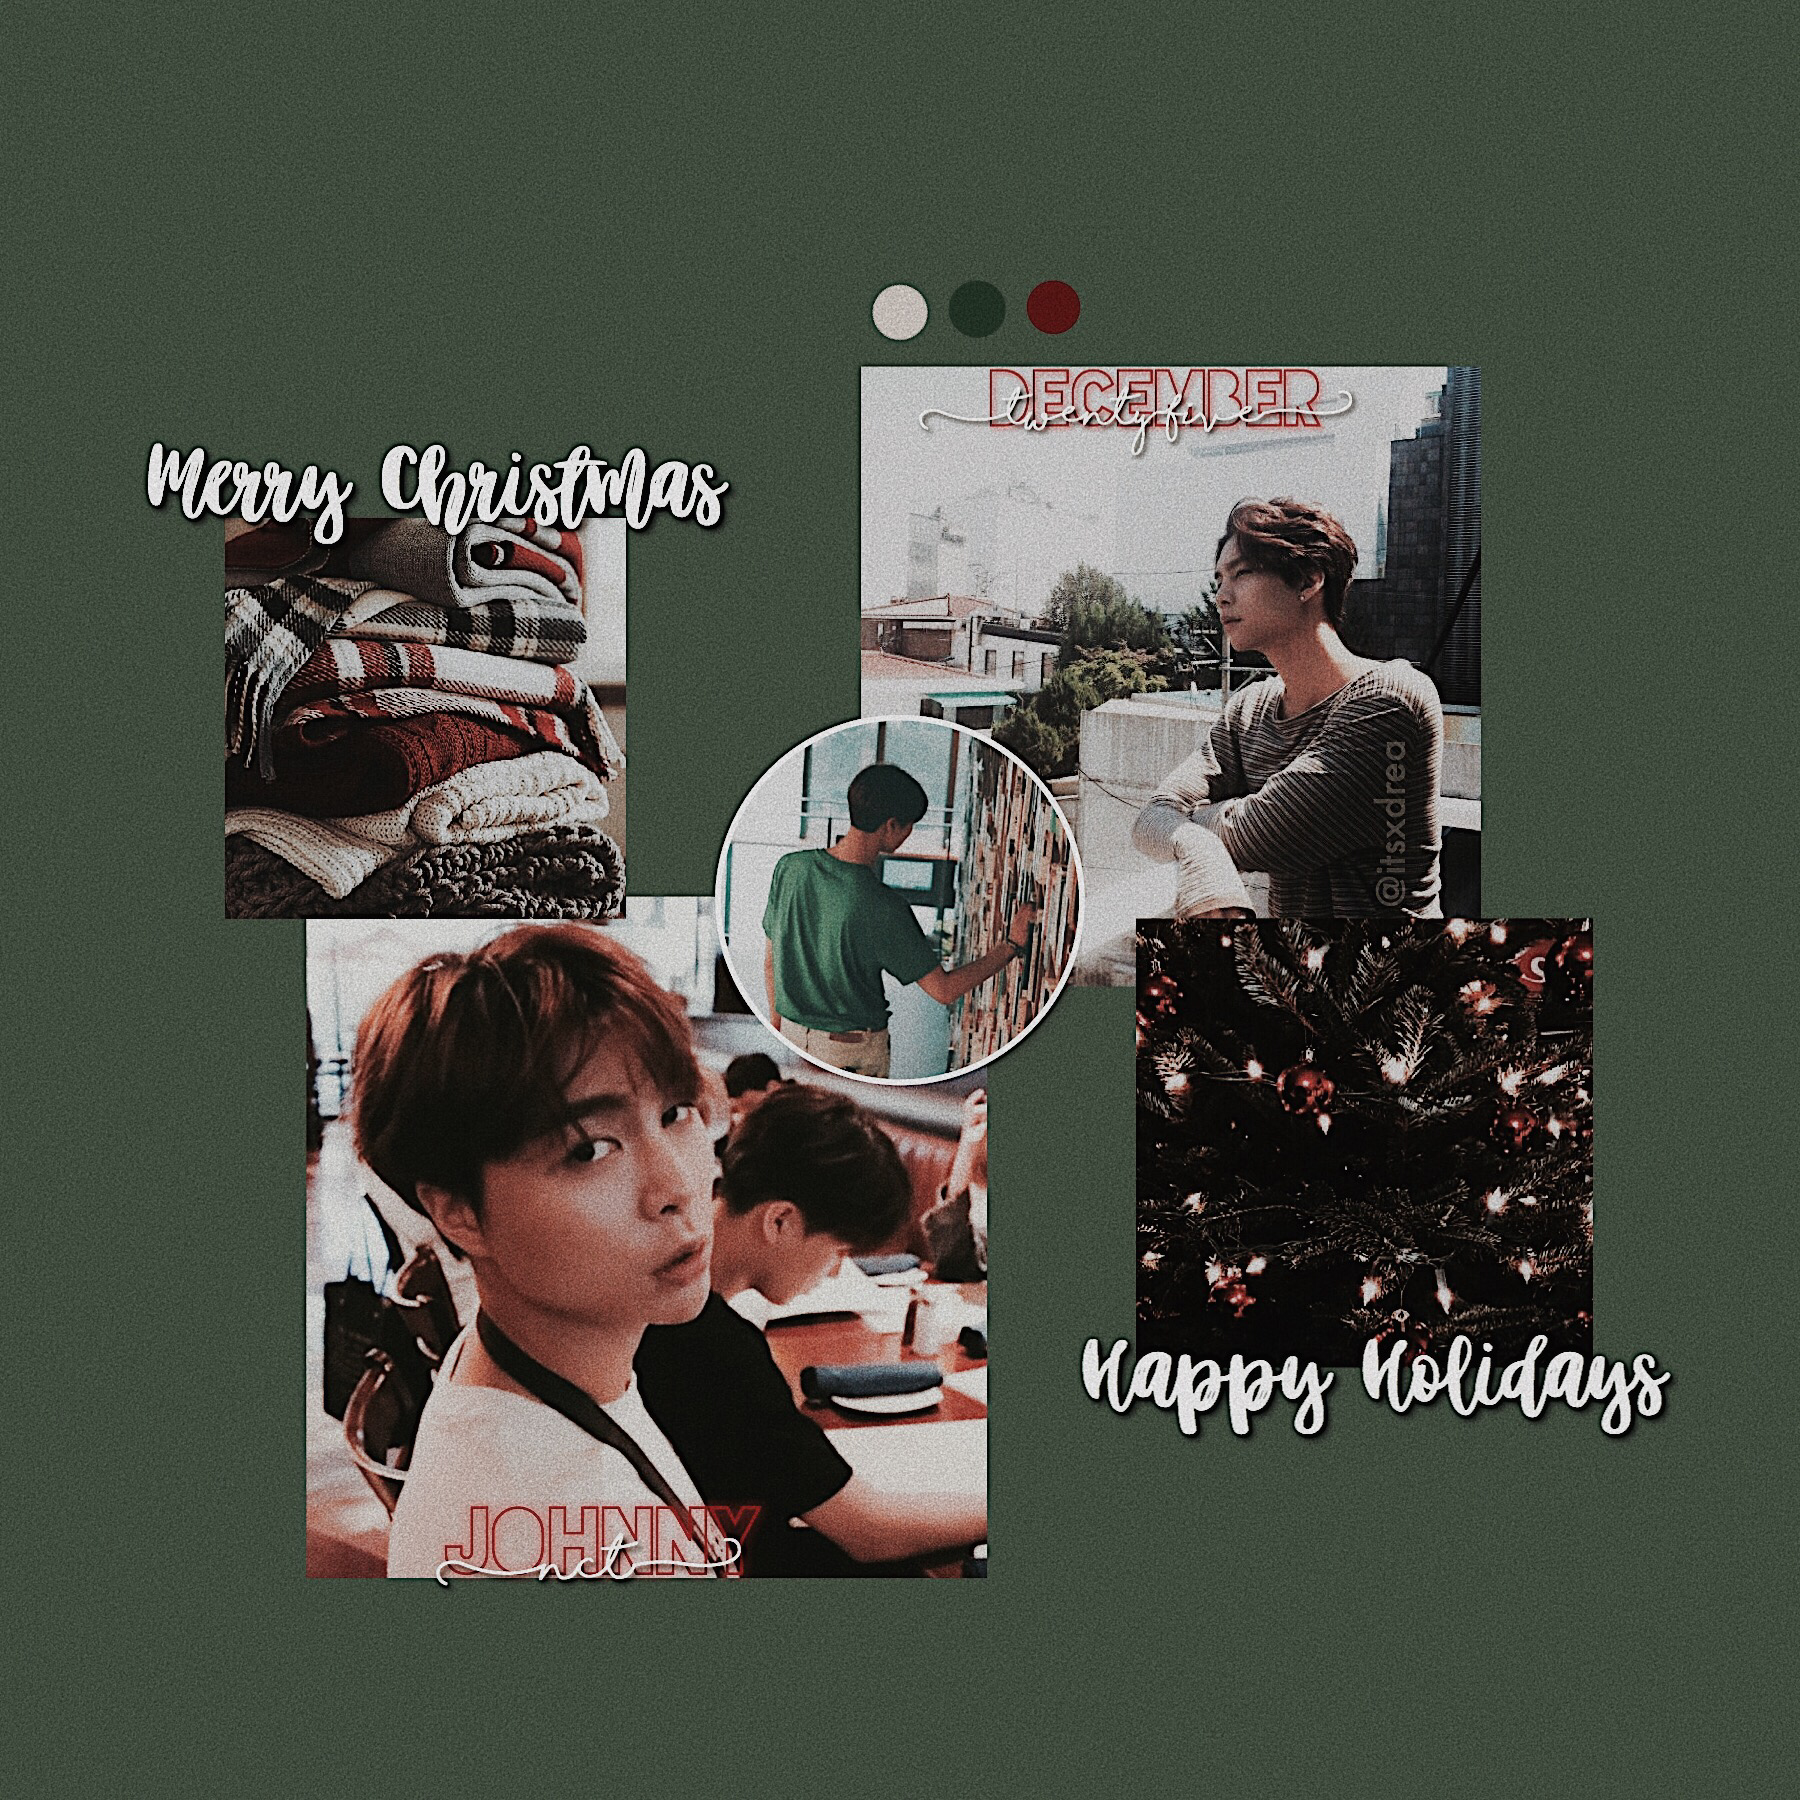 🎄
~ MERRY CHRISTMAS OR HAPPY HOLIDAYS TO THOSE THAT DONT CELEBRATE CHRISTMAS ~ 
i hope everyone had a great time w their family and friends and got what you wished for 🥰